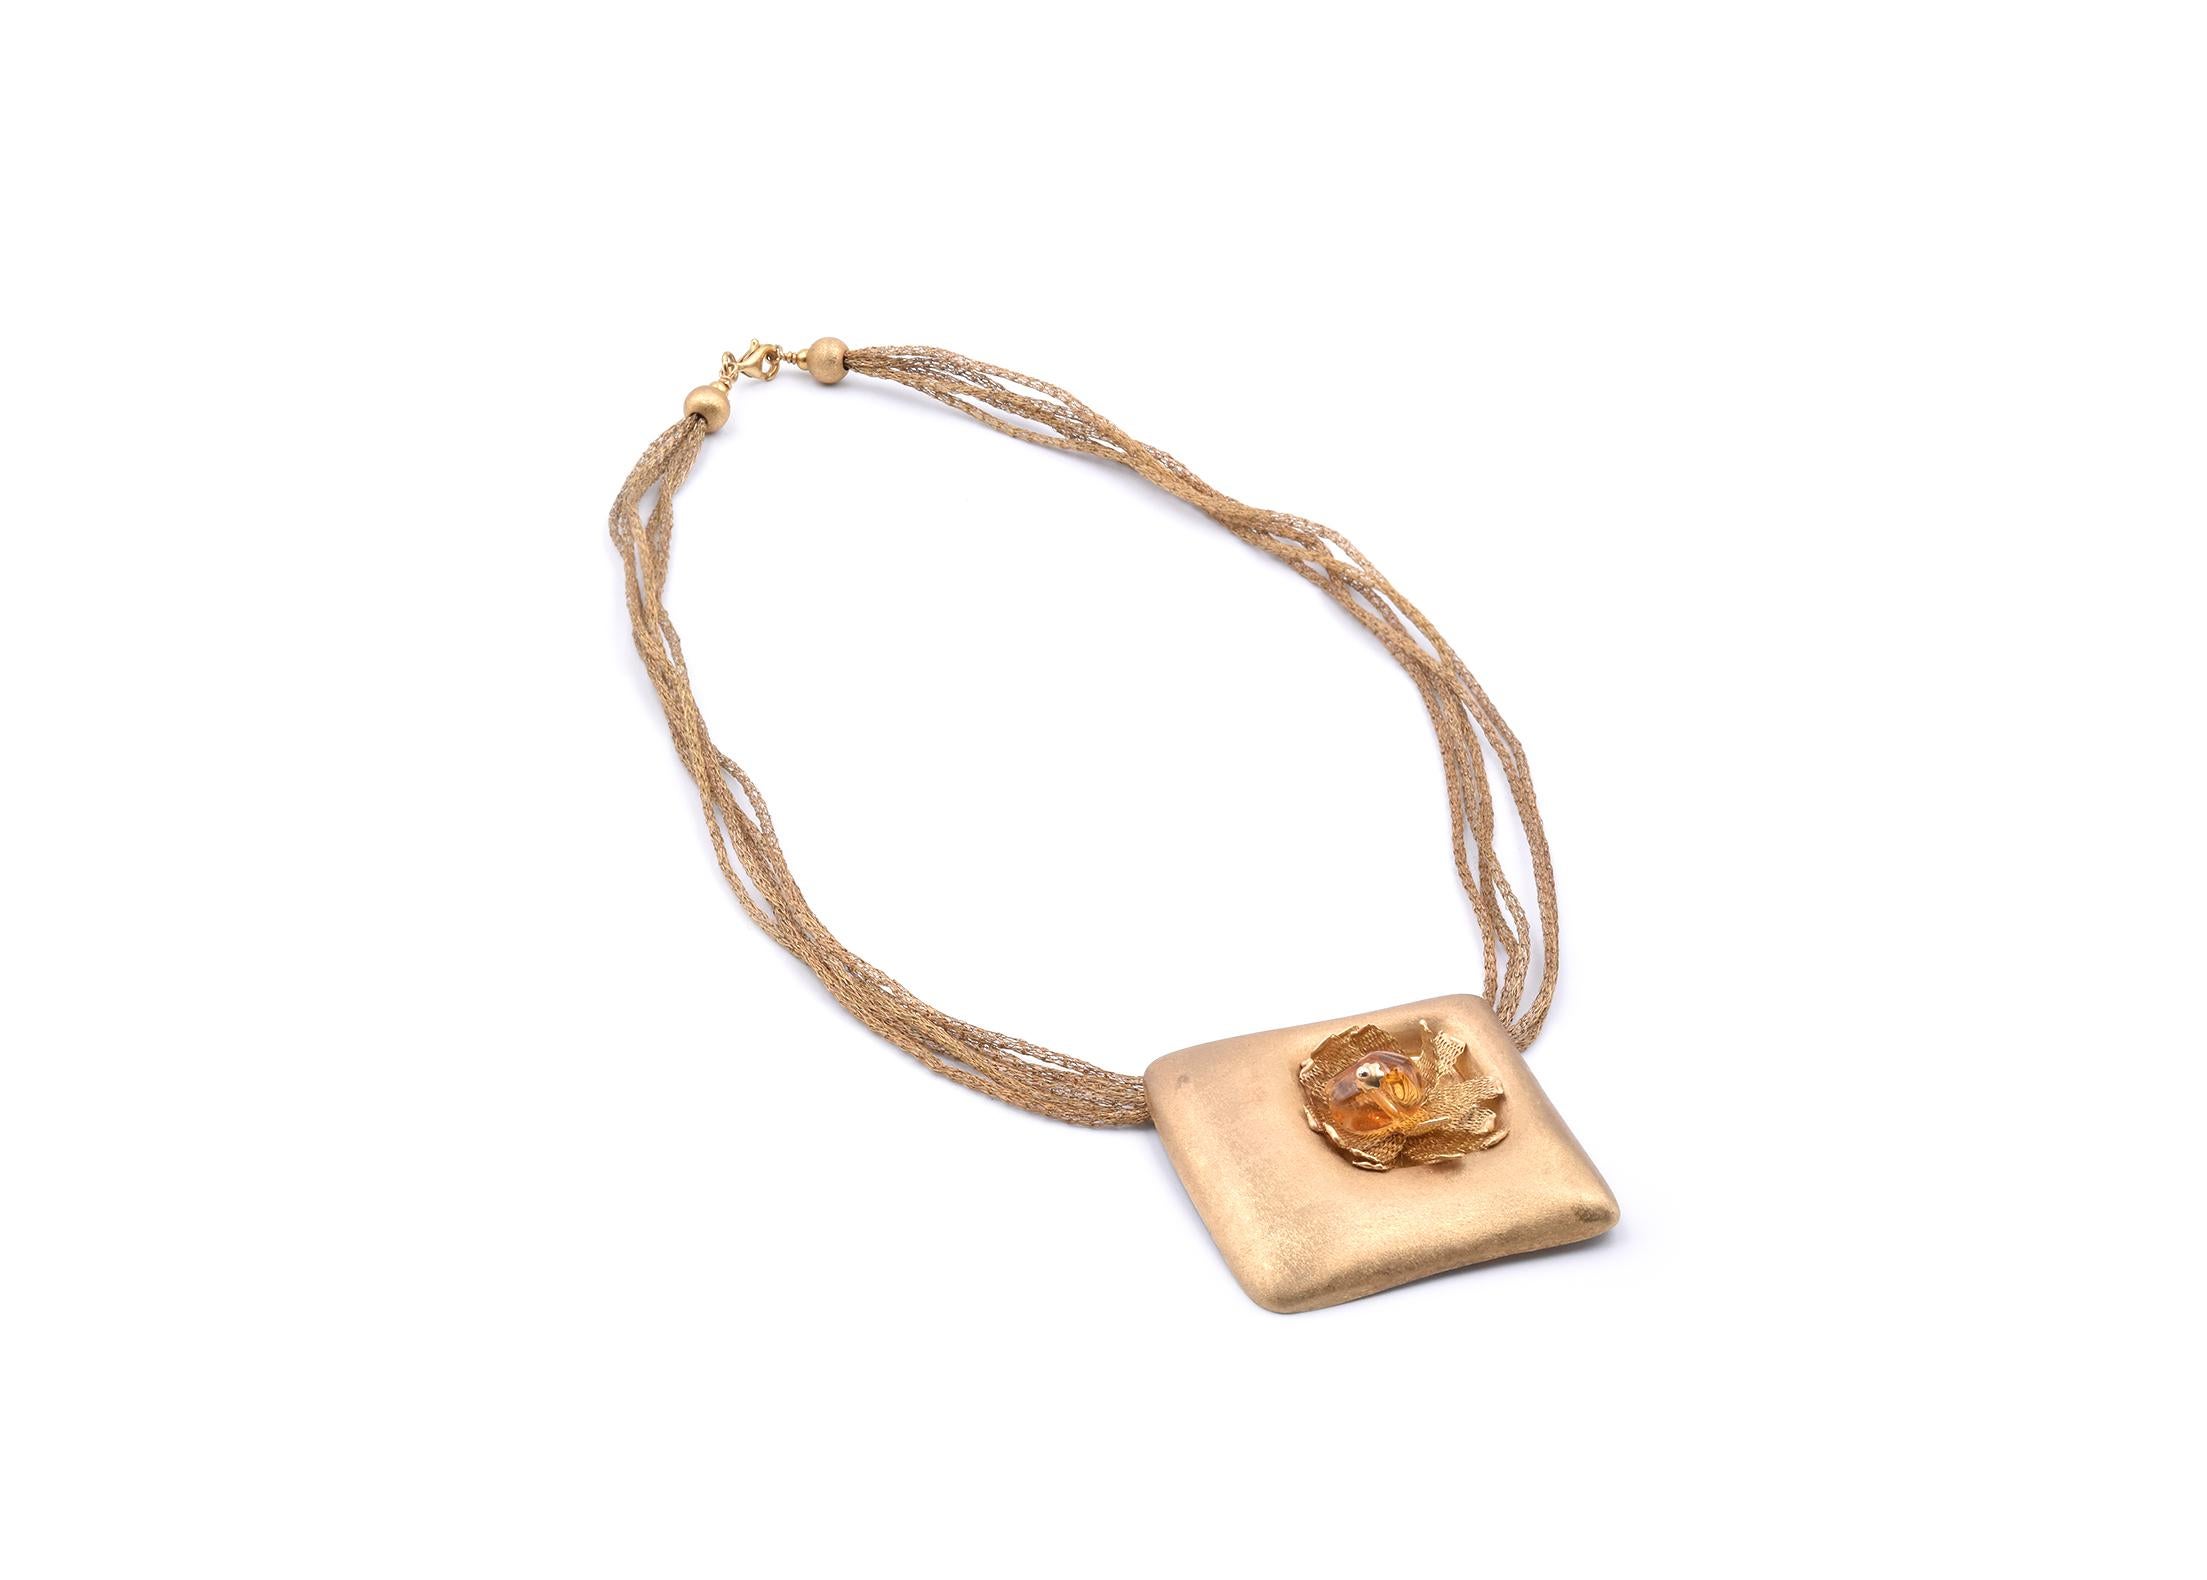 Material: 14k yellow gold
Gemstone: Citrine
Dimensions: necklace is 17-inches in length, pendant measures 16.88mm x 15.47mm
Weight: 14.7 grams
